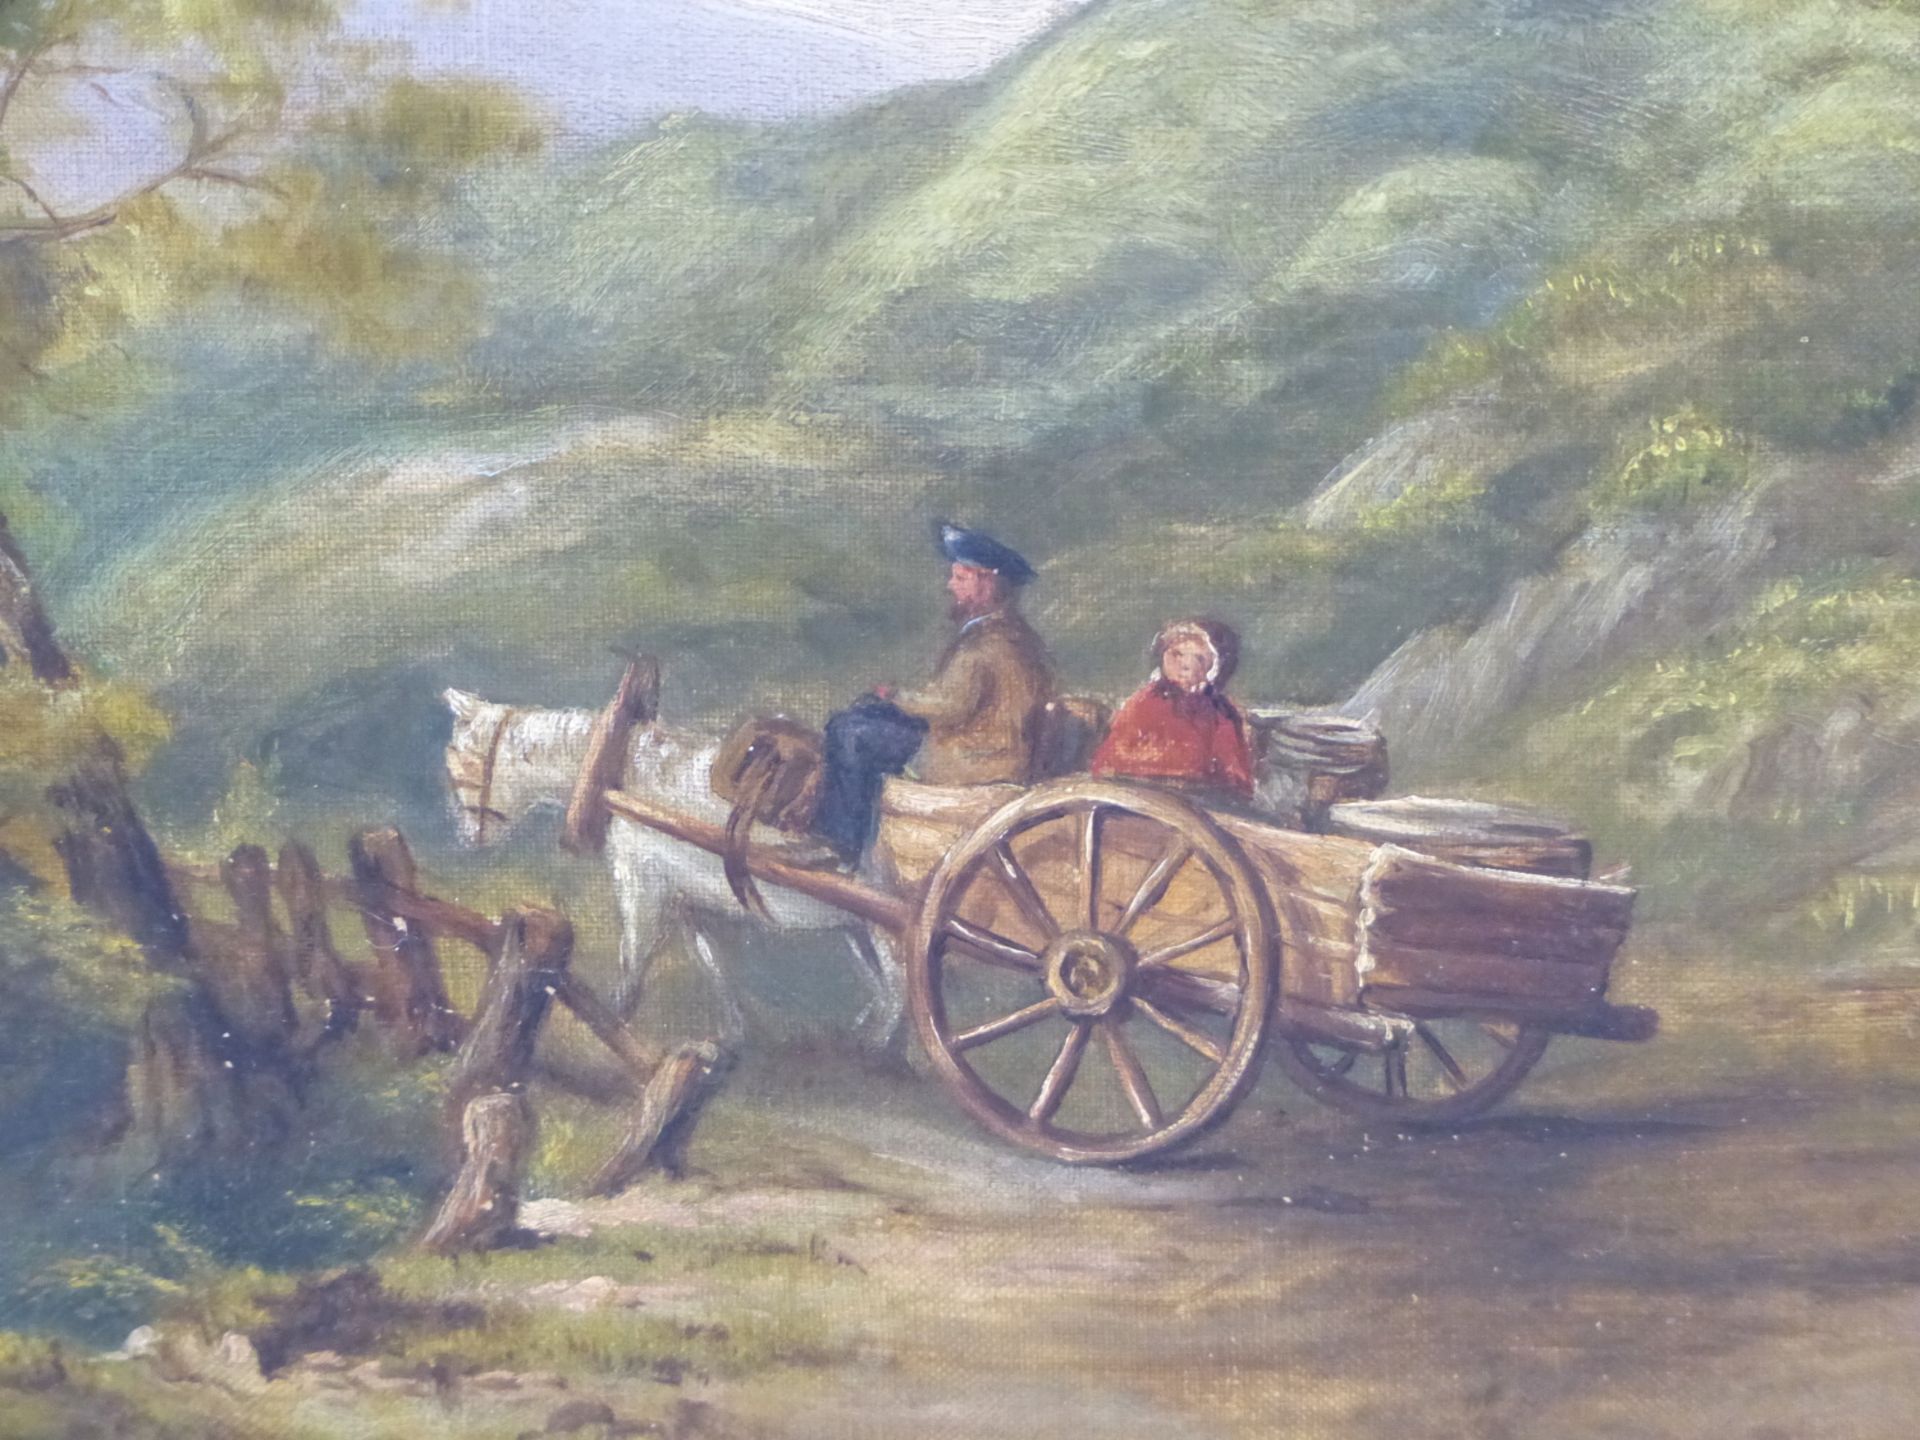 19TH CENTURY, ENGLISH SCHOOL. HORSE AND CART WITHIN RUGGED LANDSCAPE, OIL ON CANVAS.39 X 35 cm. - Image 3 of 7